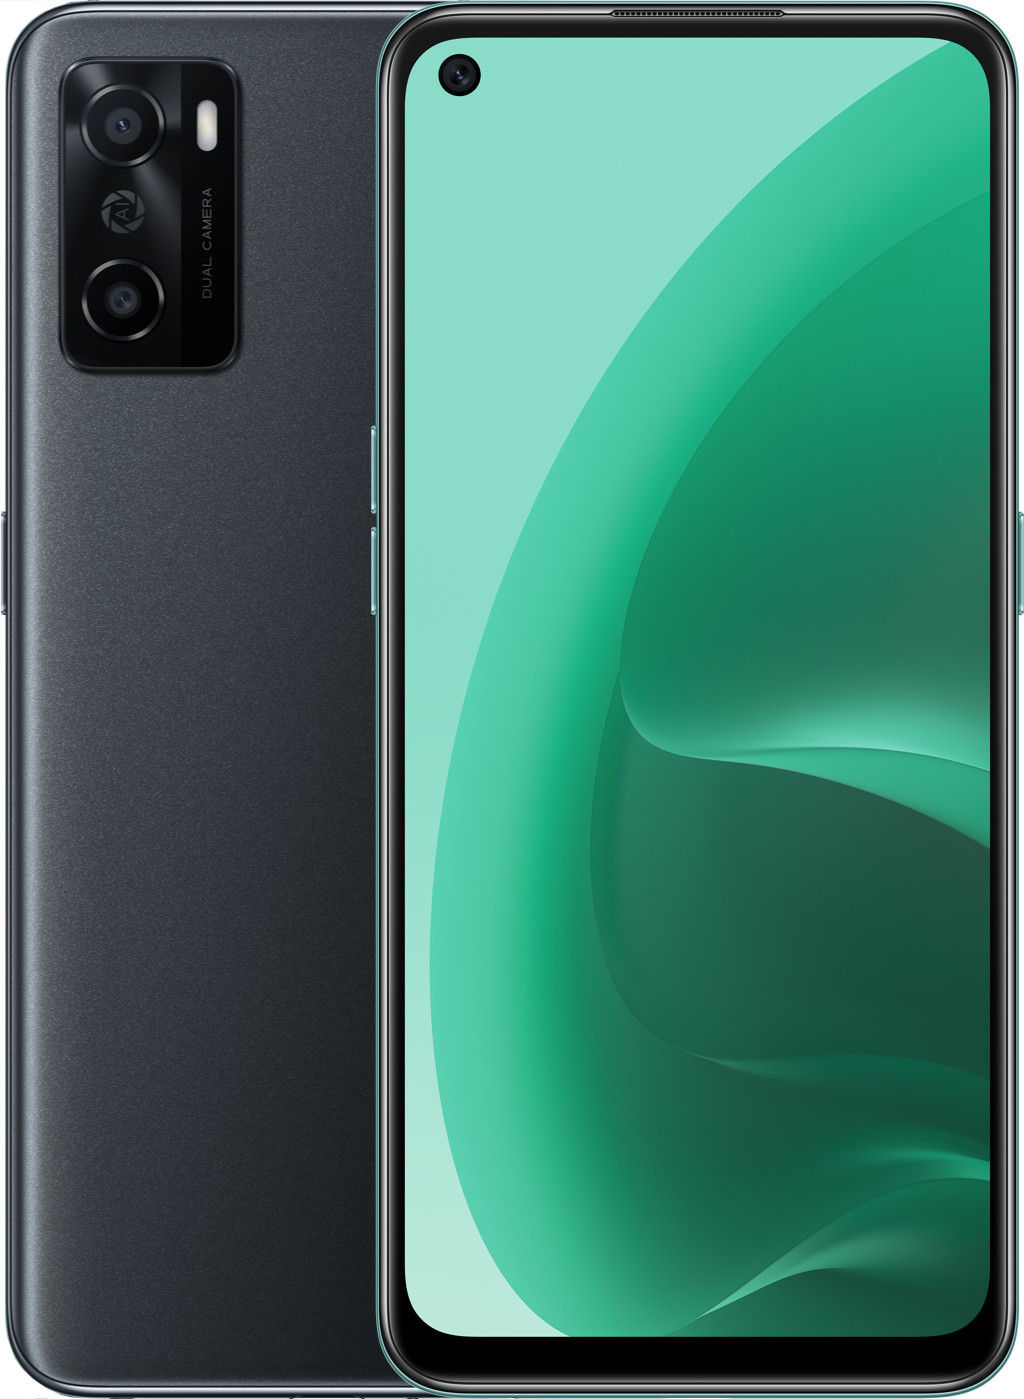 OPPO A55s 5G - Full Specifications | 91mobiles.com